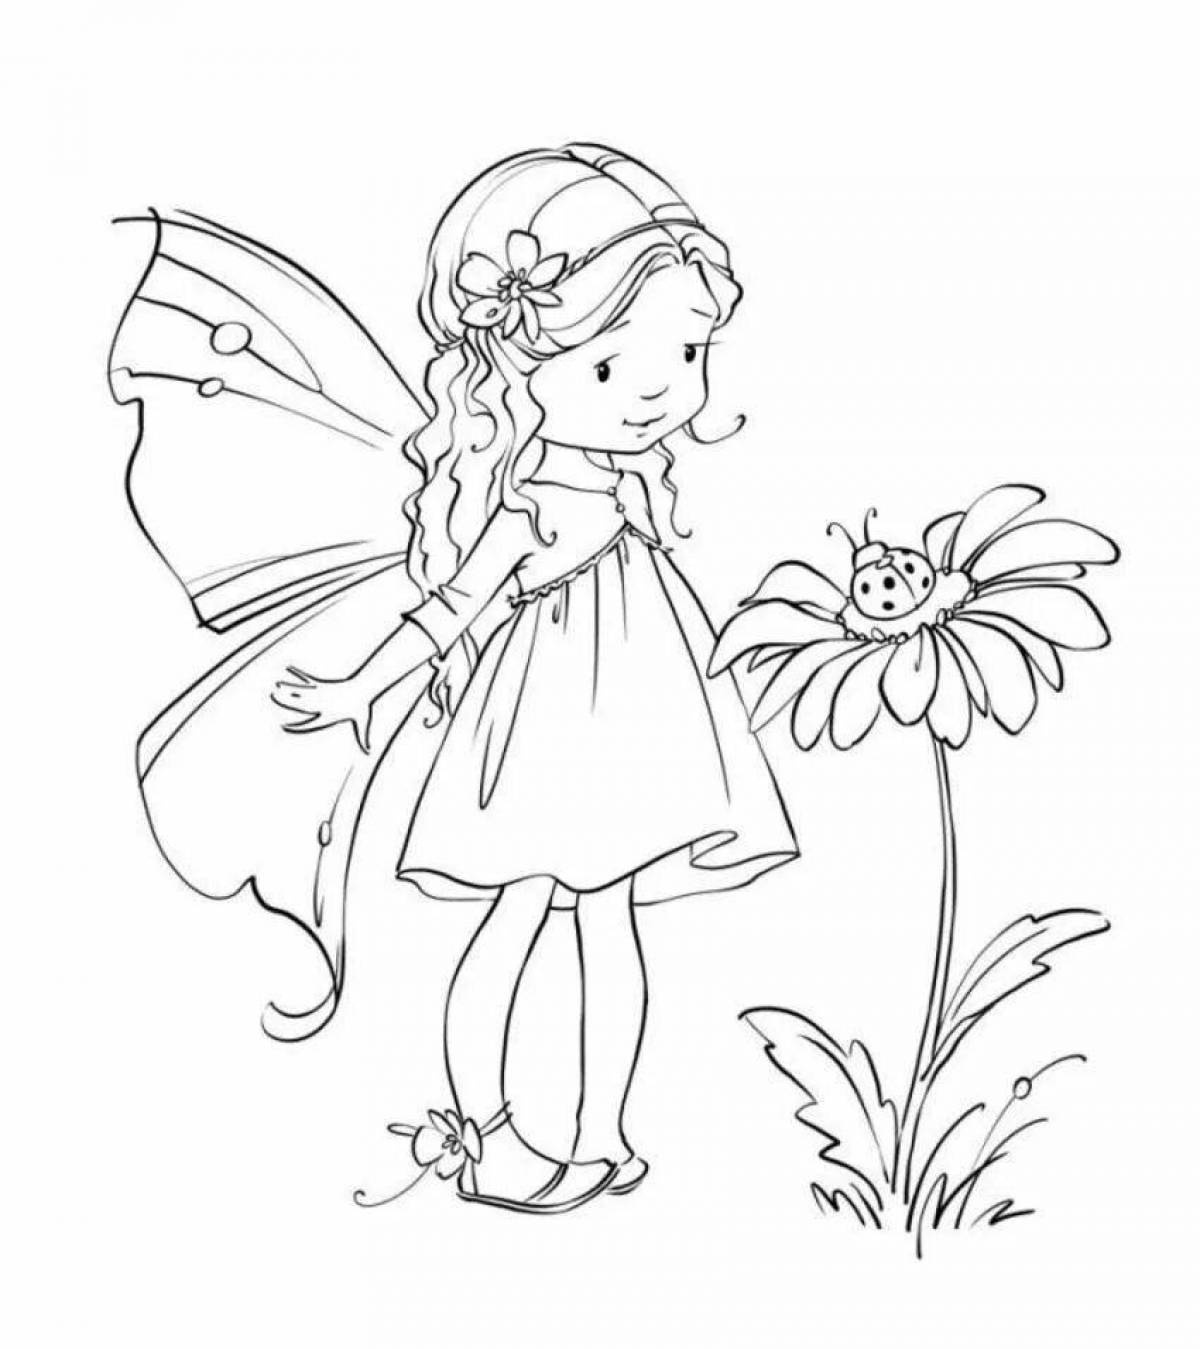 Fairy coloring pages for girls